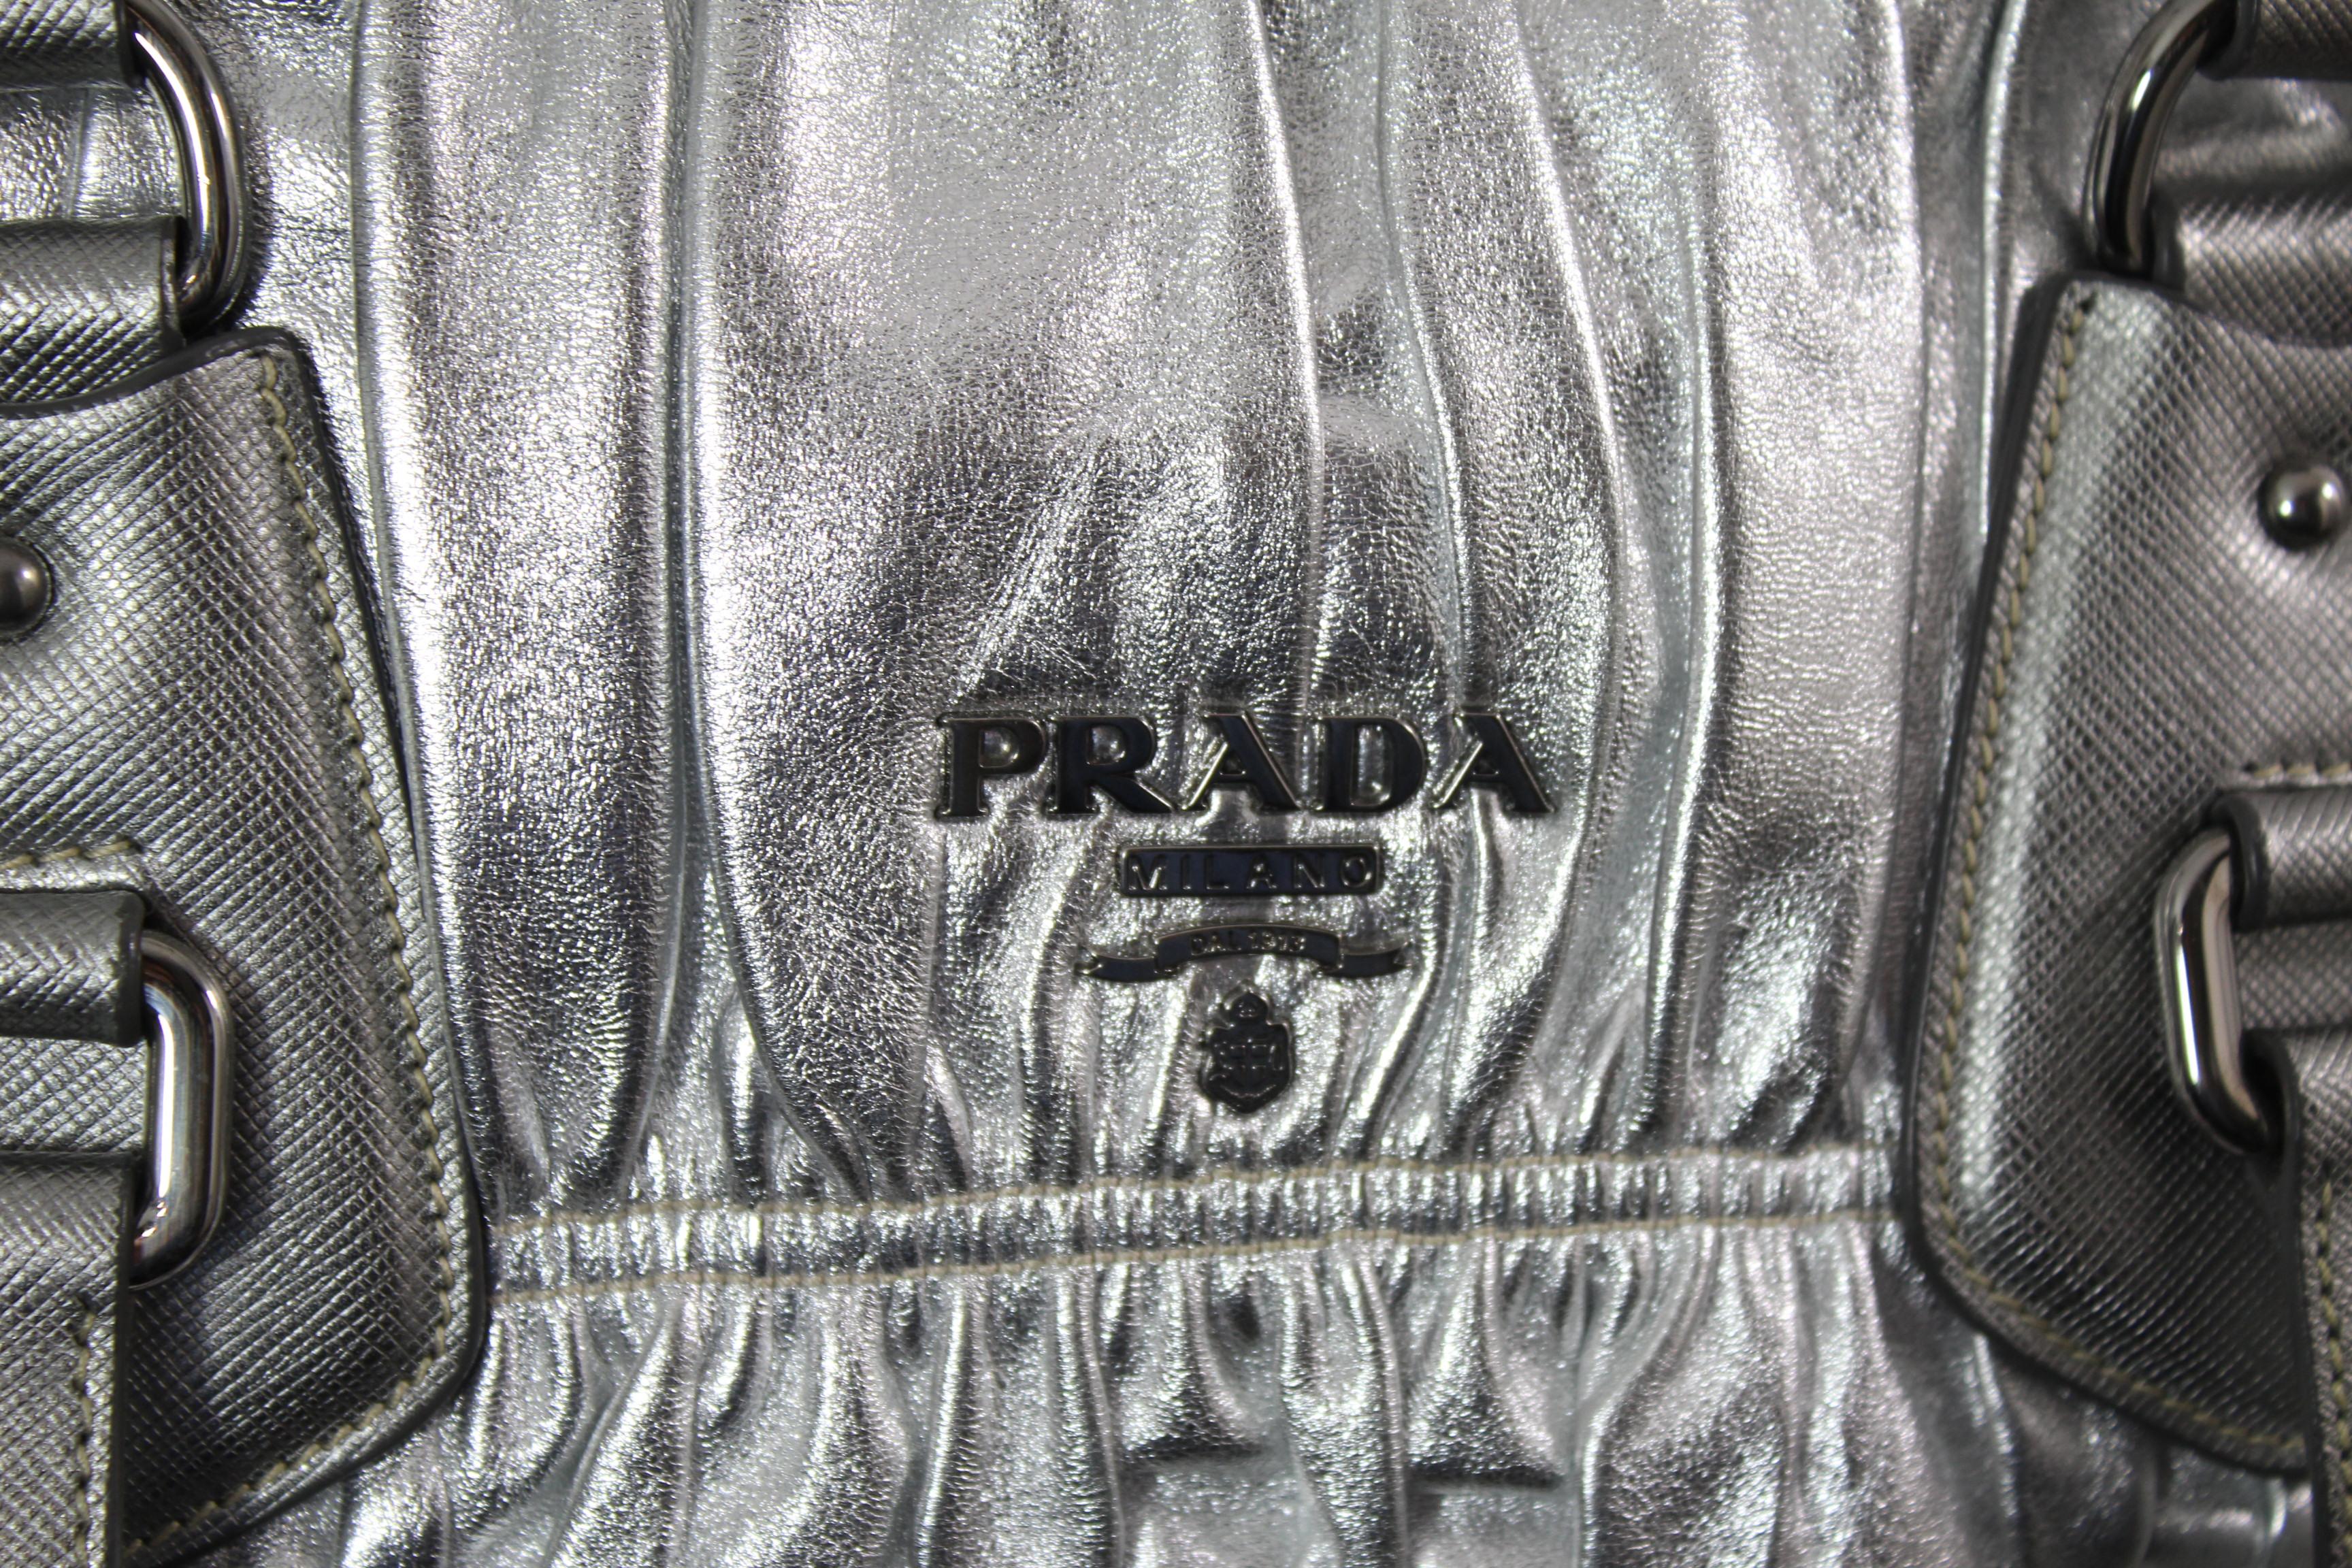 Super useful Prada Siilver leather Bag.

Good condition, just light signs of use in the leather.

Retail price more than 2400$

Sold with straap and 2 dust bags.